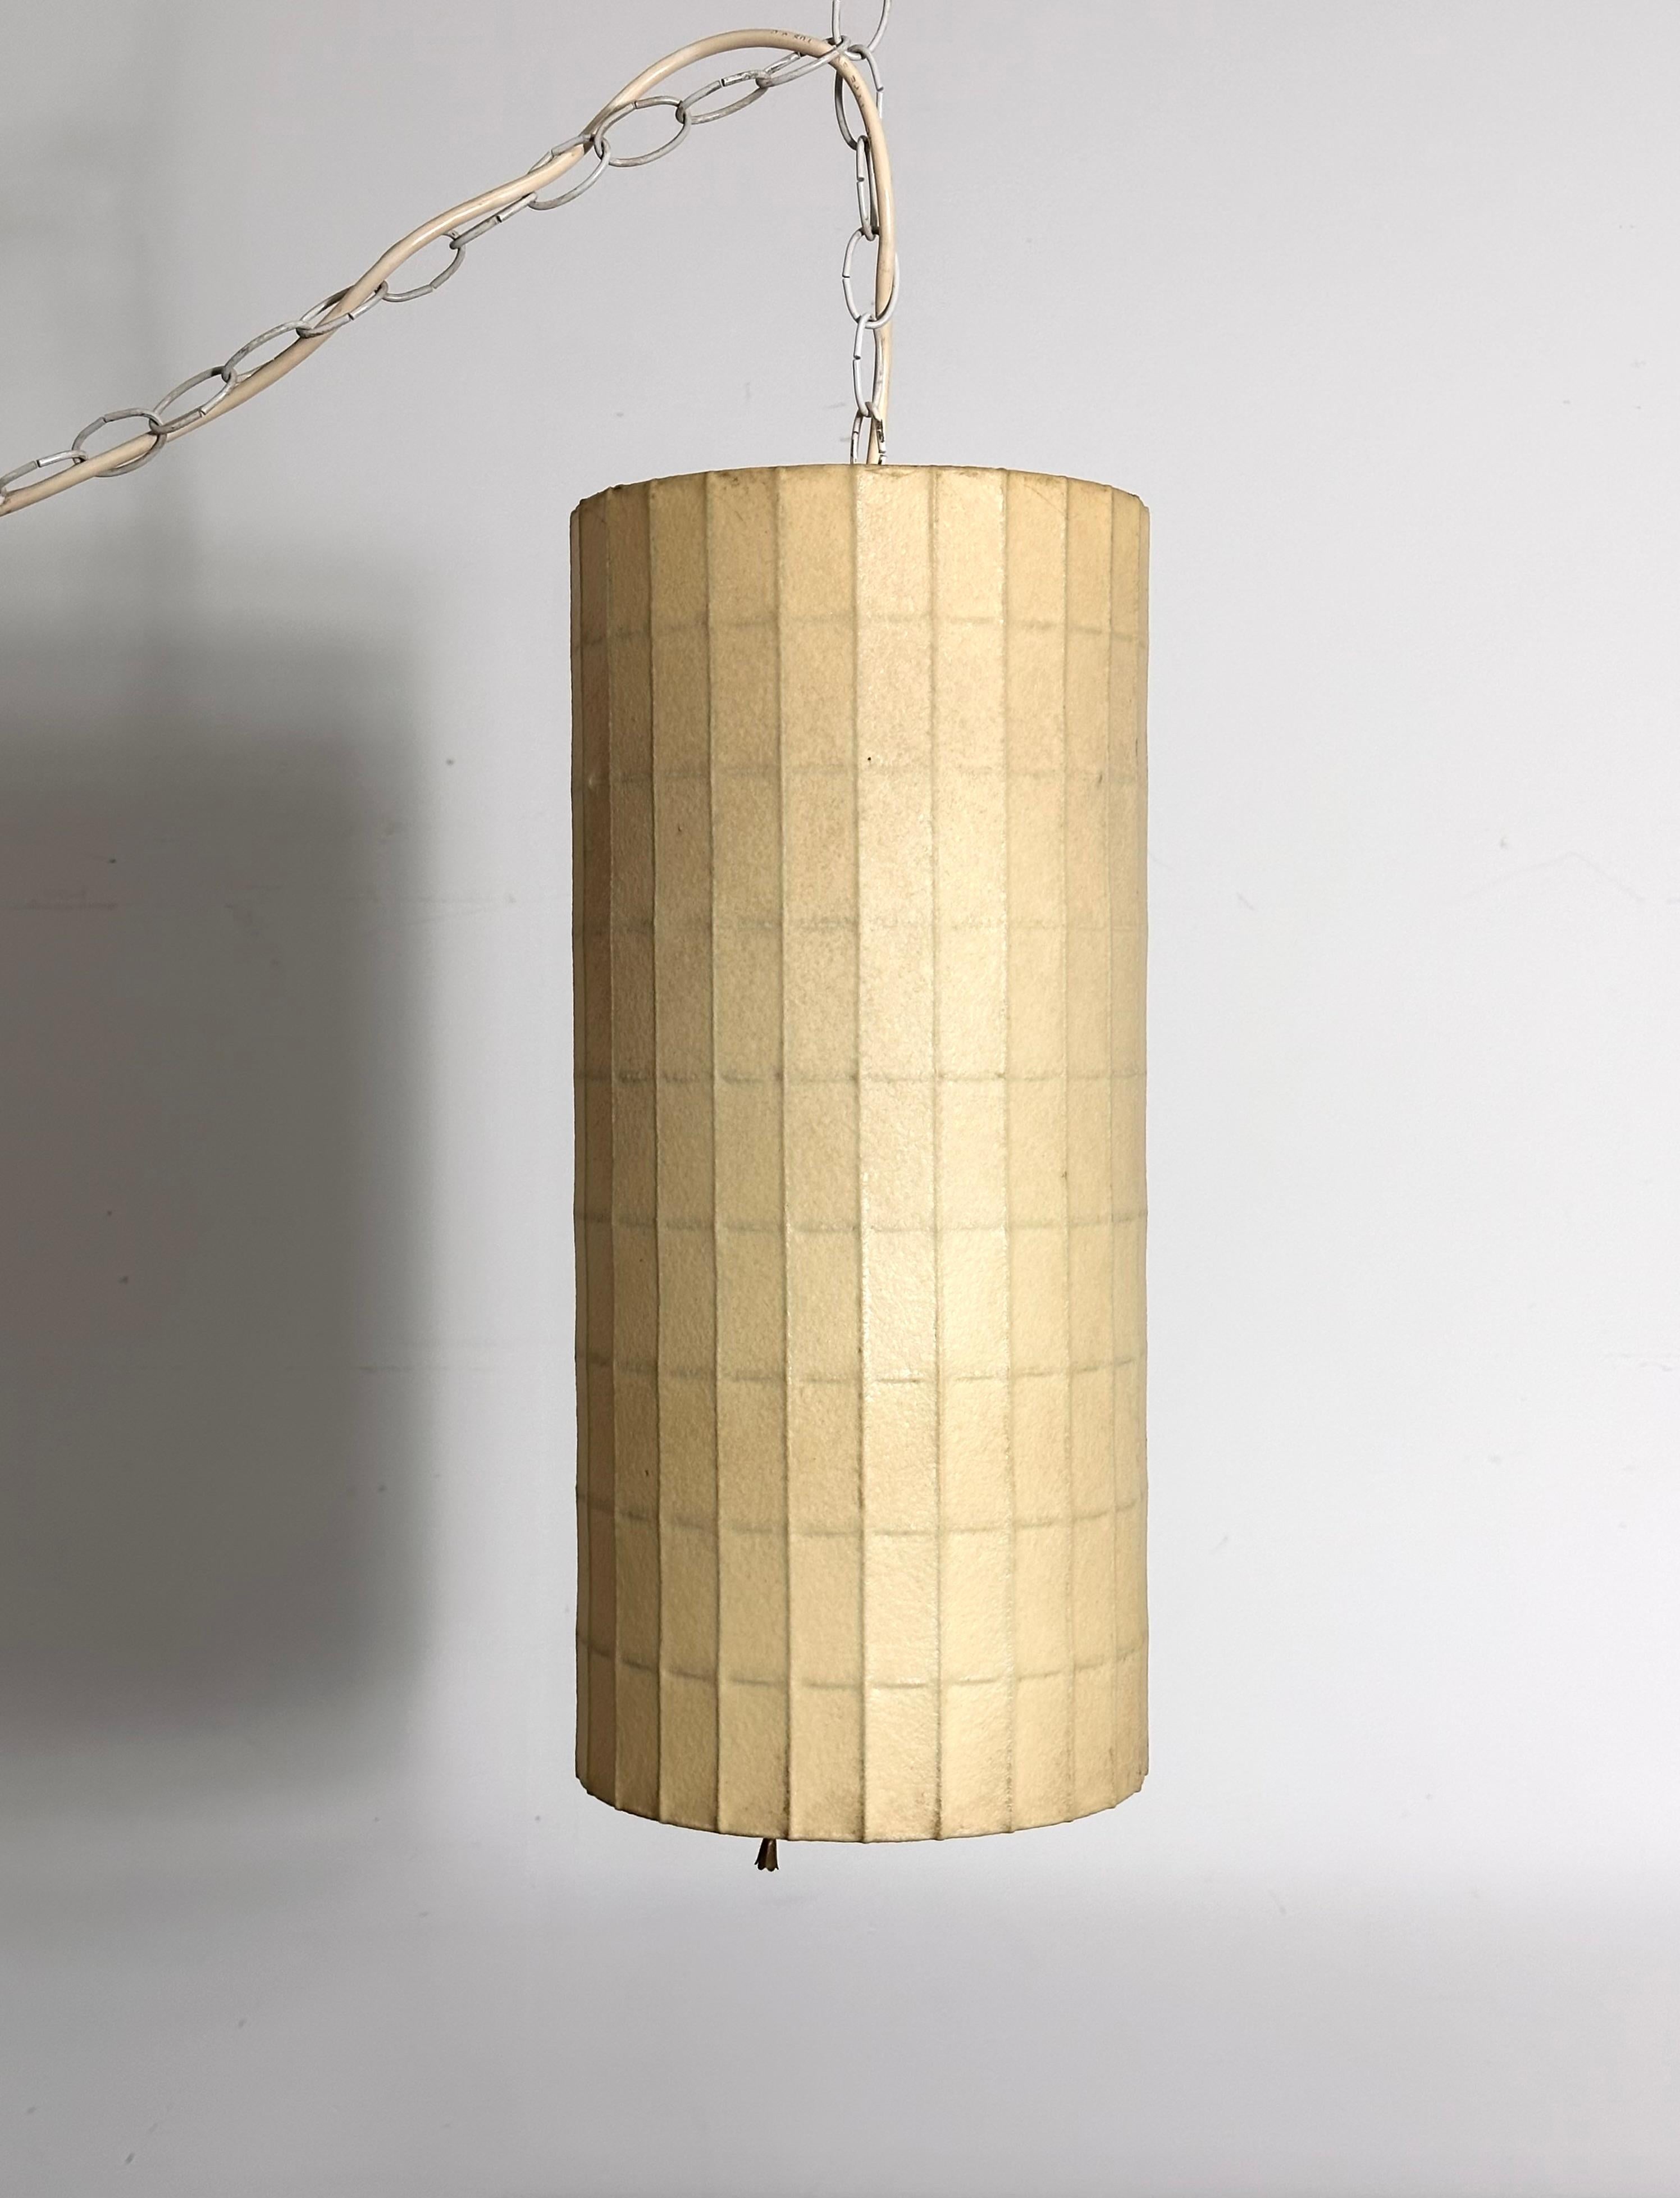 A rare cylinder form bubble lamp pendant designed by William Renwick of George Nelson & Associates for Howard Miller circa 1950s

Steel wire grid frame coated in the bubble lamp signature webbed polymer 
Model number H-736

Shade measures 8